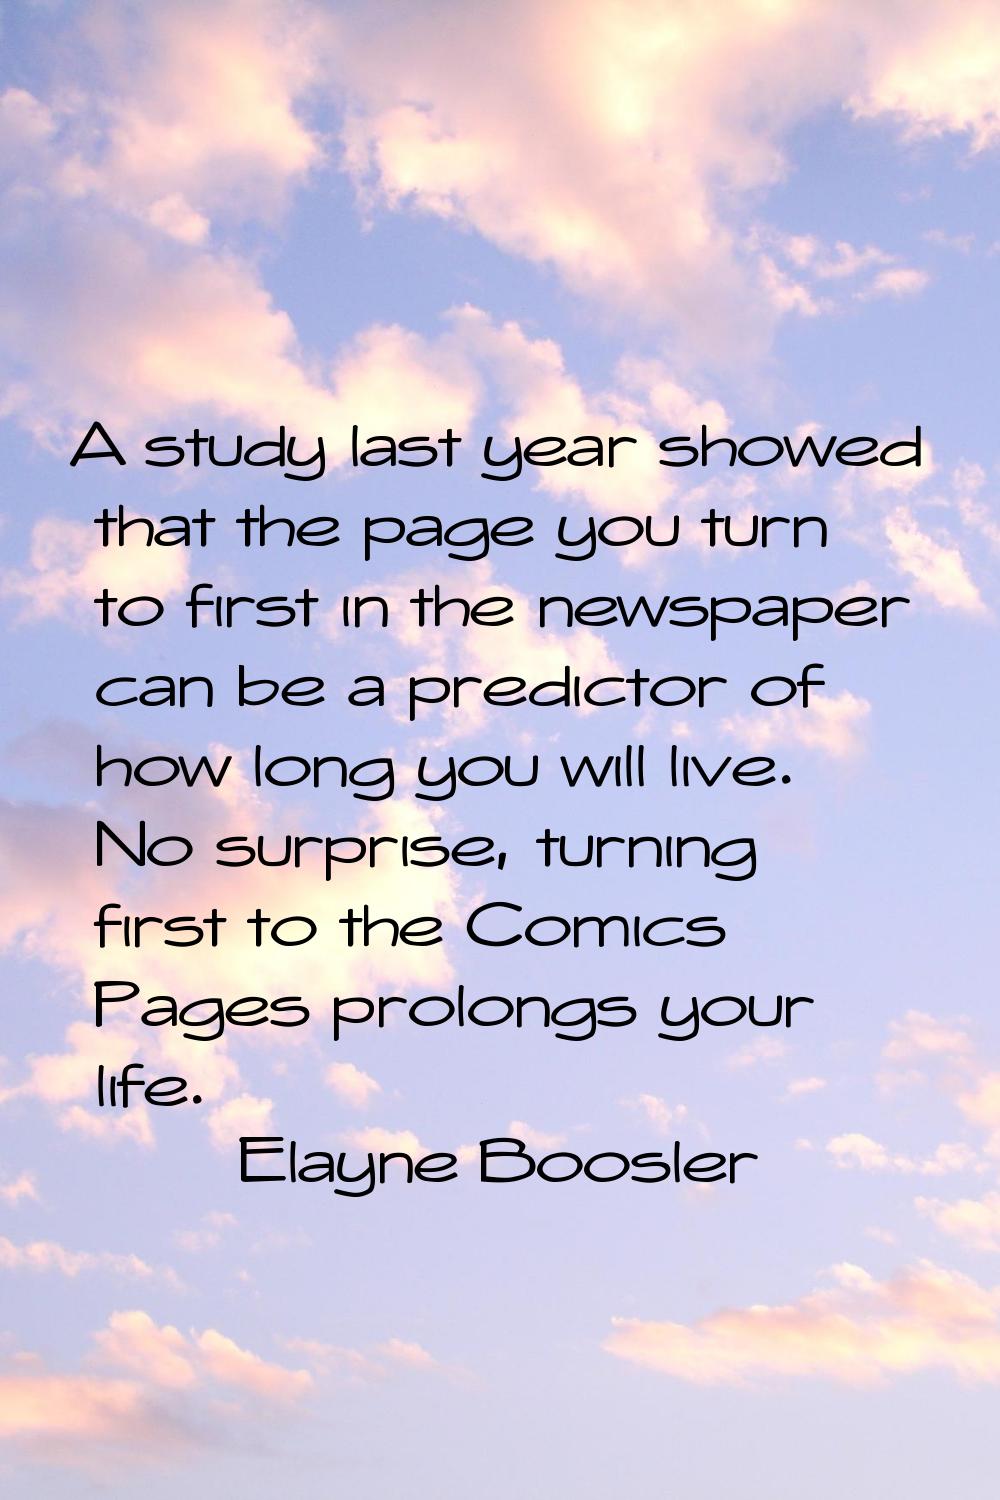 A study last year showed that the page you turn to first in the newspaper can be a predictor of how